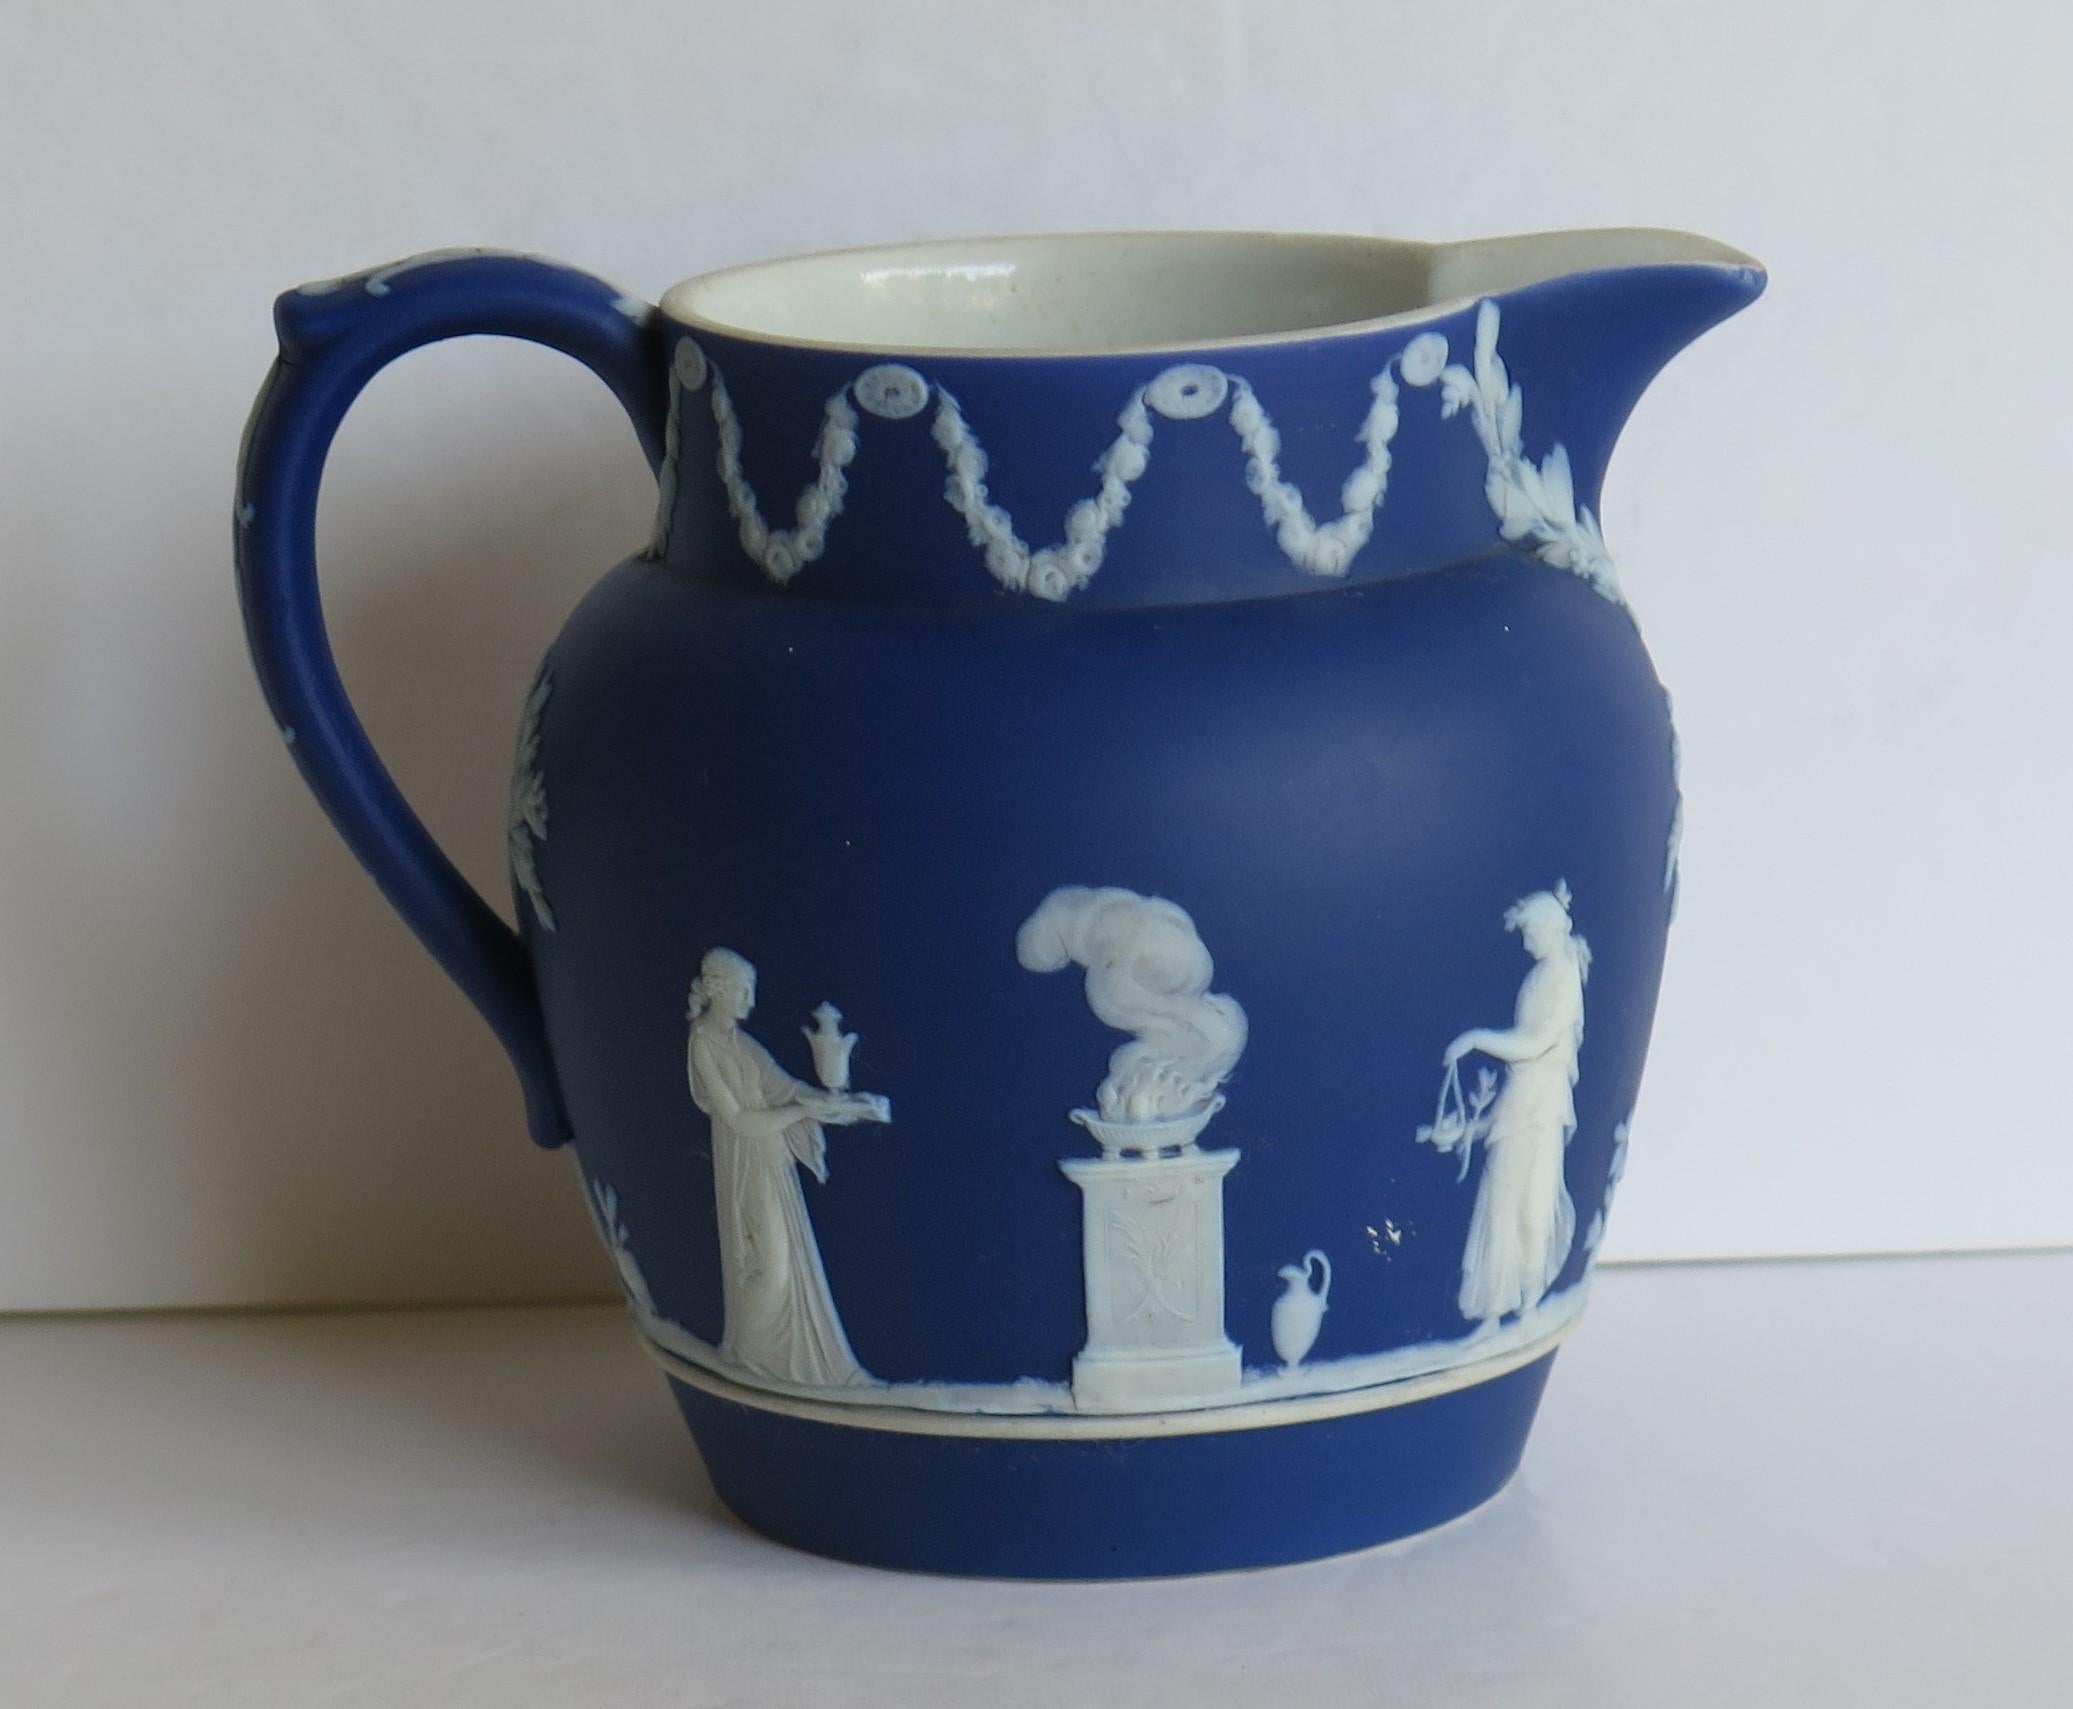 This is a good Jasperware stoneware jug or pitcher, made by Wedgwood, England and dating to circa 1900. 

The jug has a lovely shape with a pouring spout and loop handle.

The jug has a classical figures pattern, the figures being applied relief